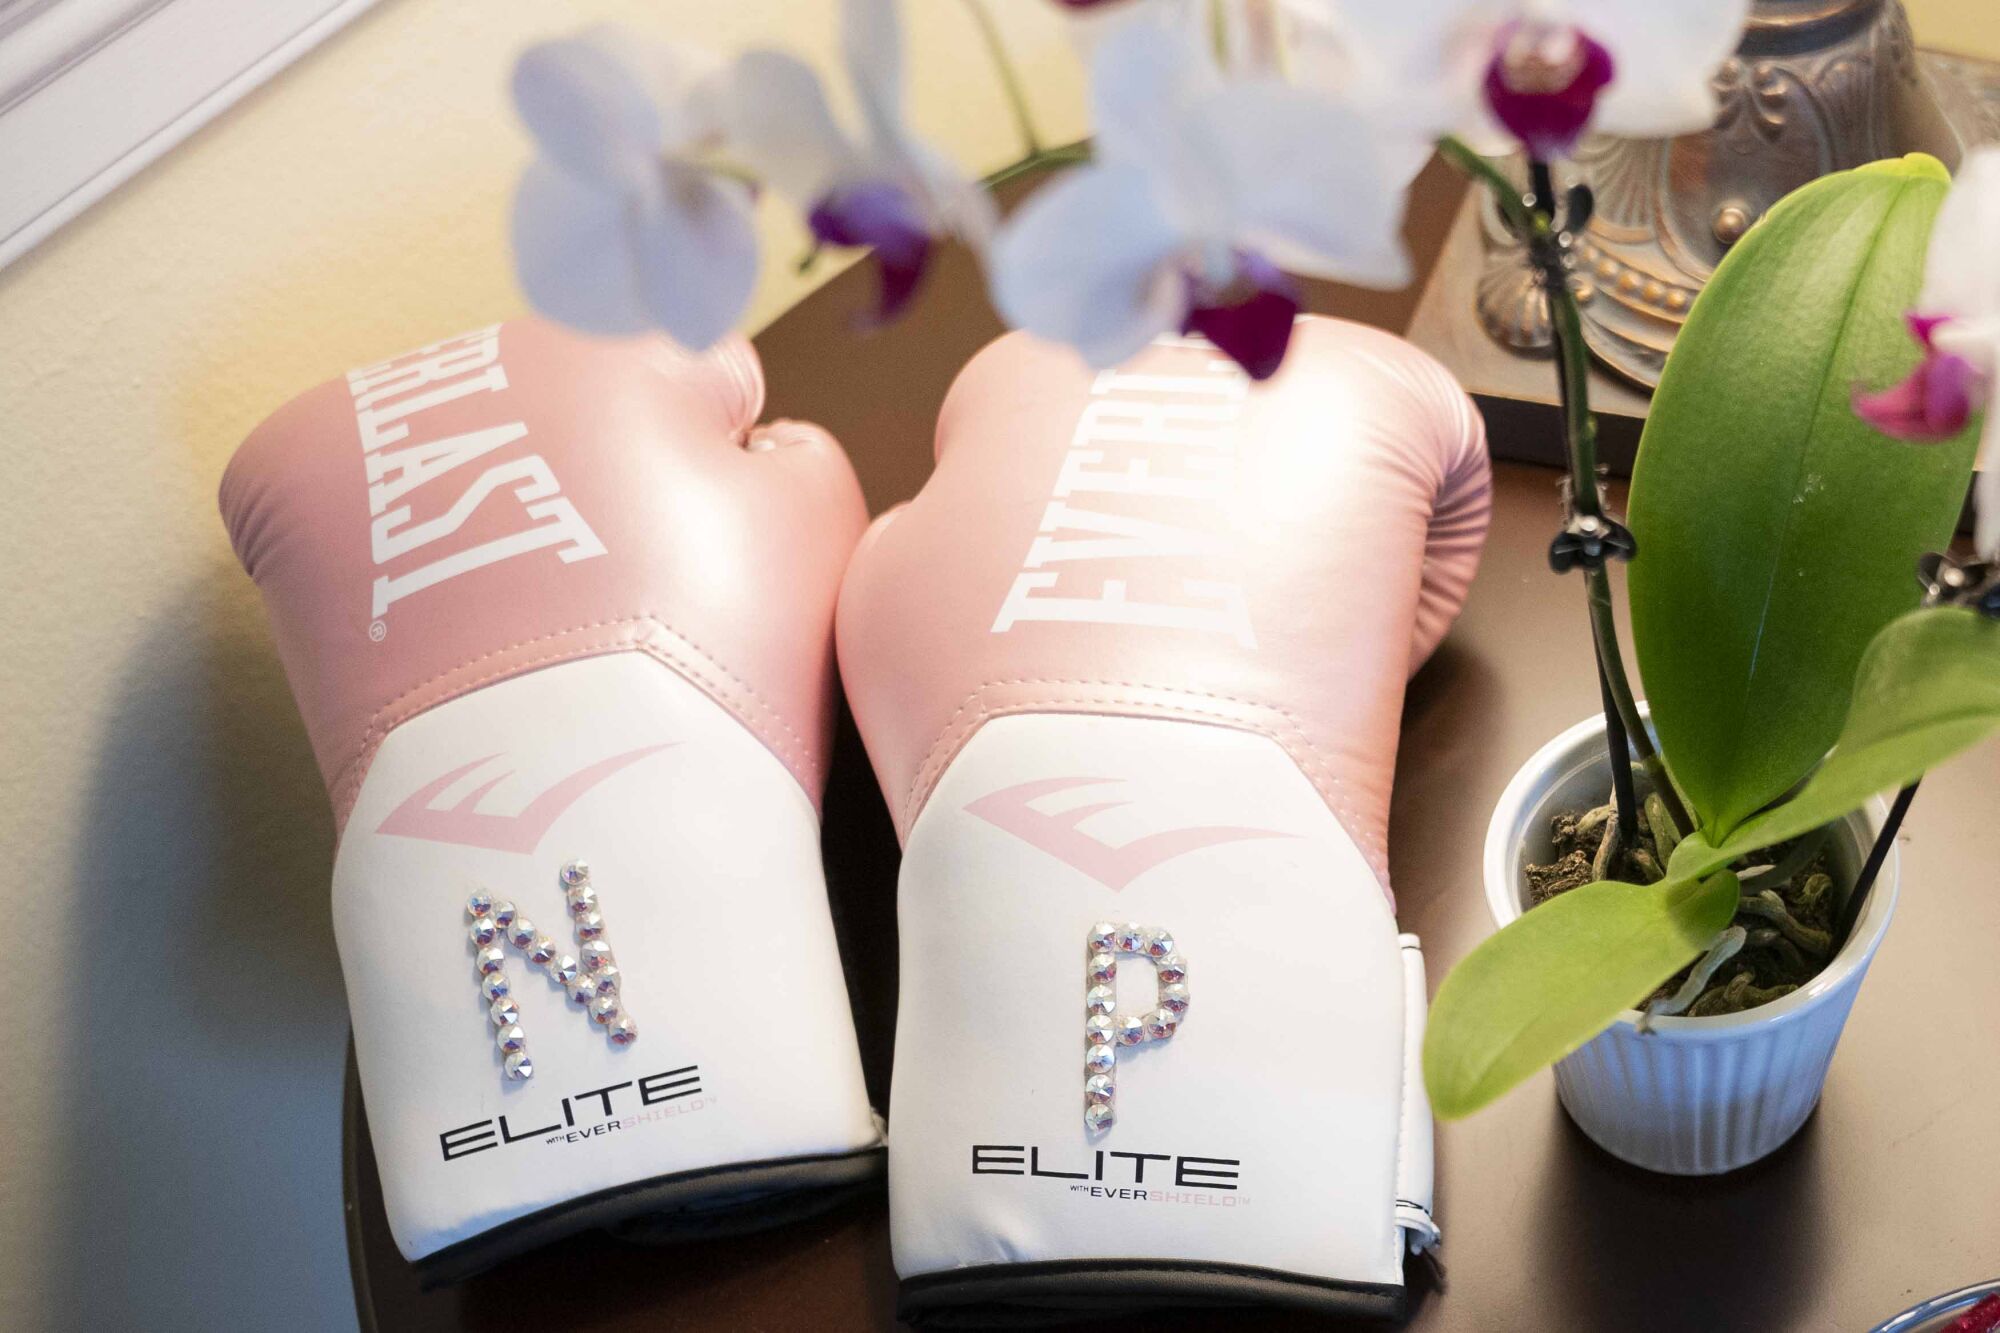 Boxing gloves embellished with a rhinestone "N" and "P" rest on a table next to orchids in Nancy Pelosi's office